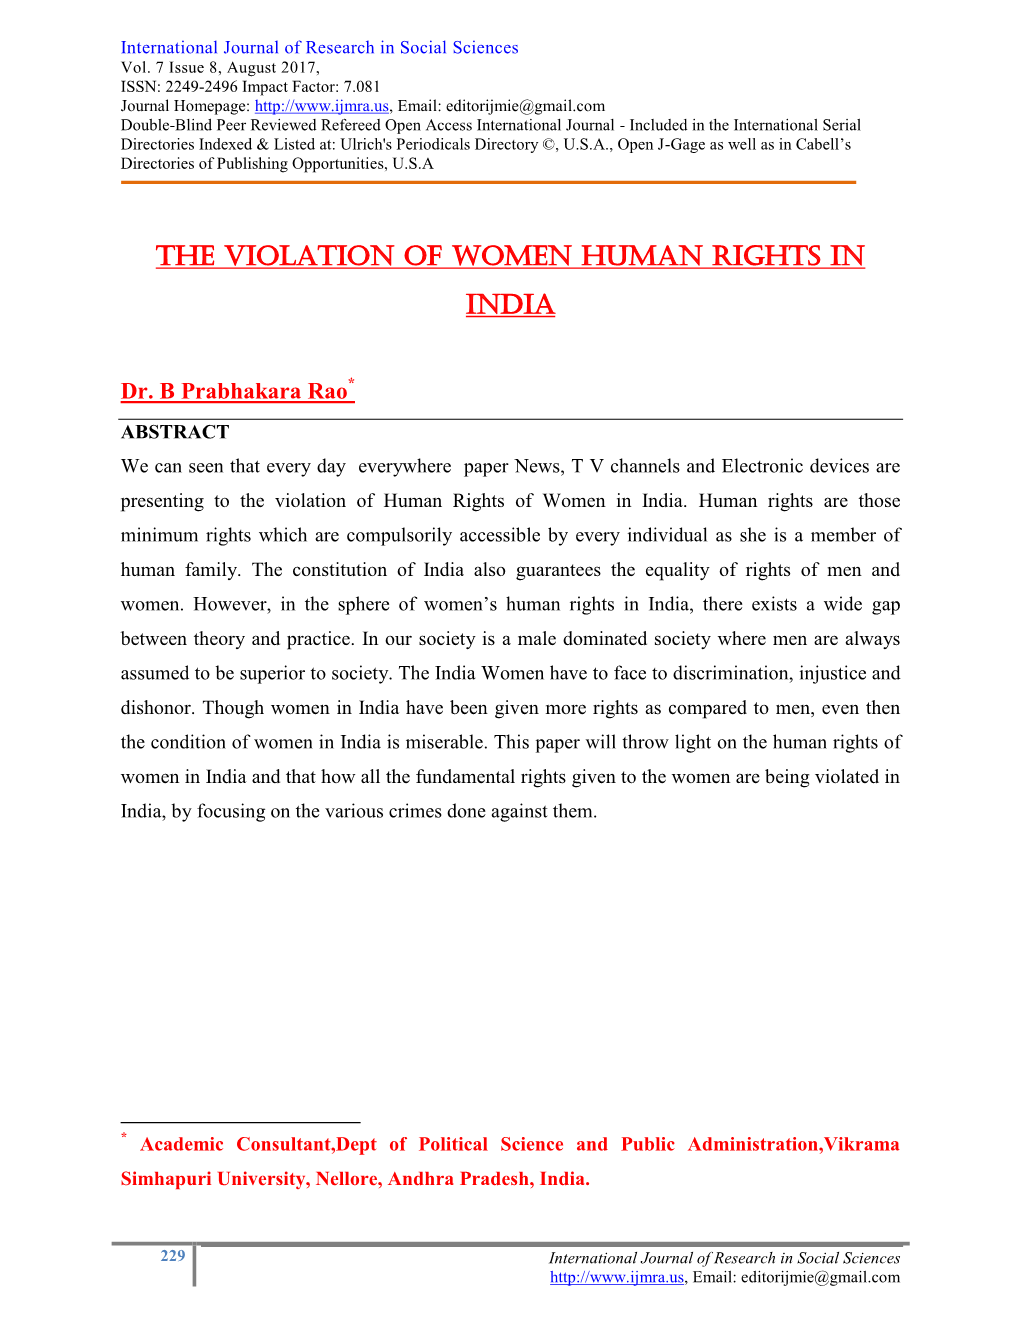 The Violation of Women Human Rights in India